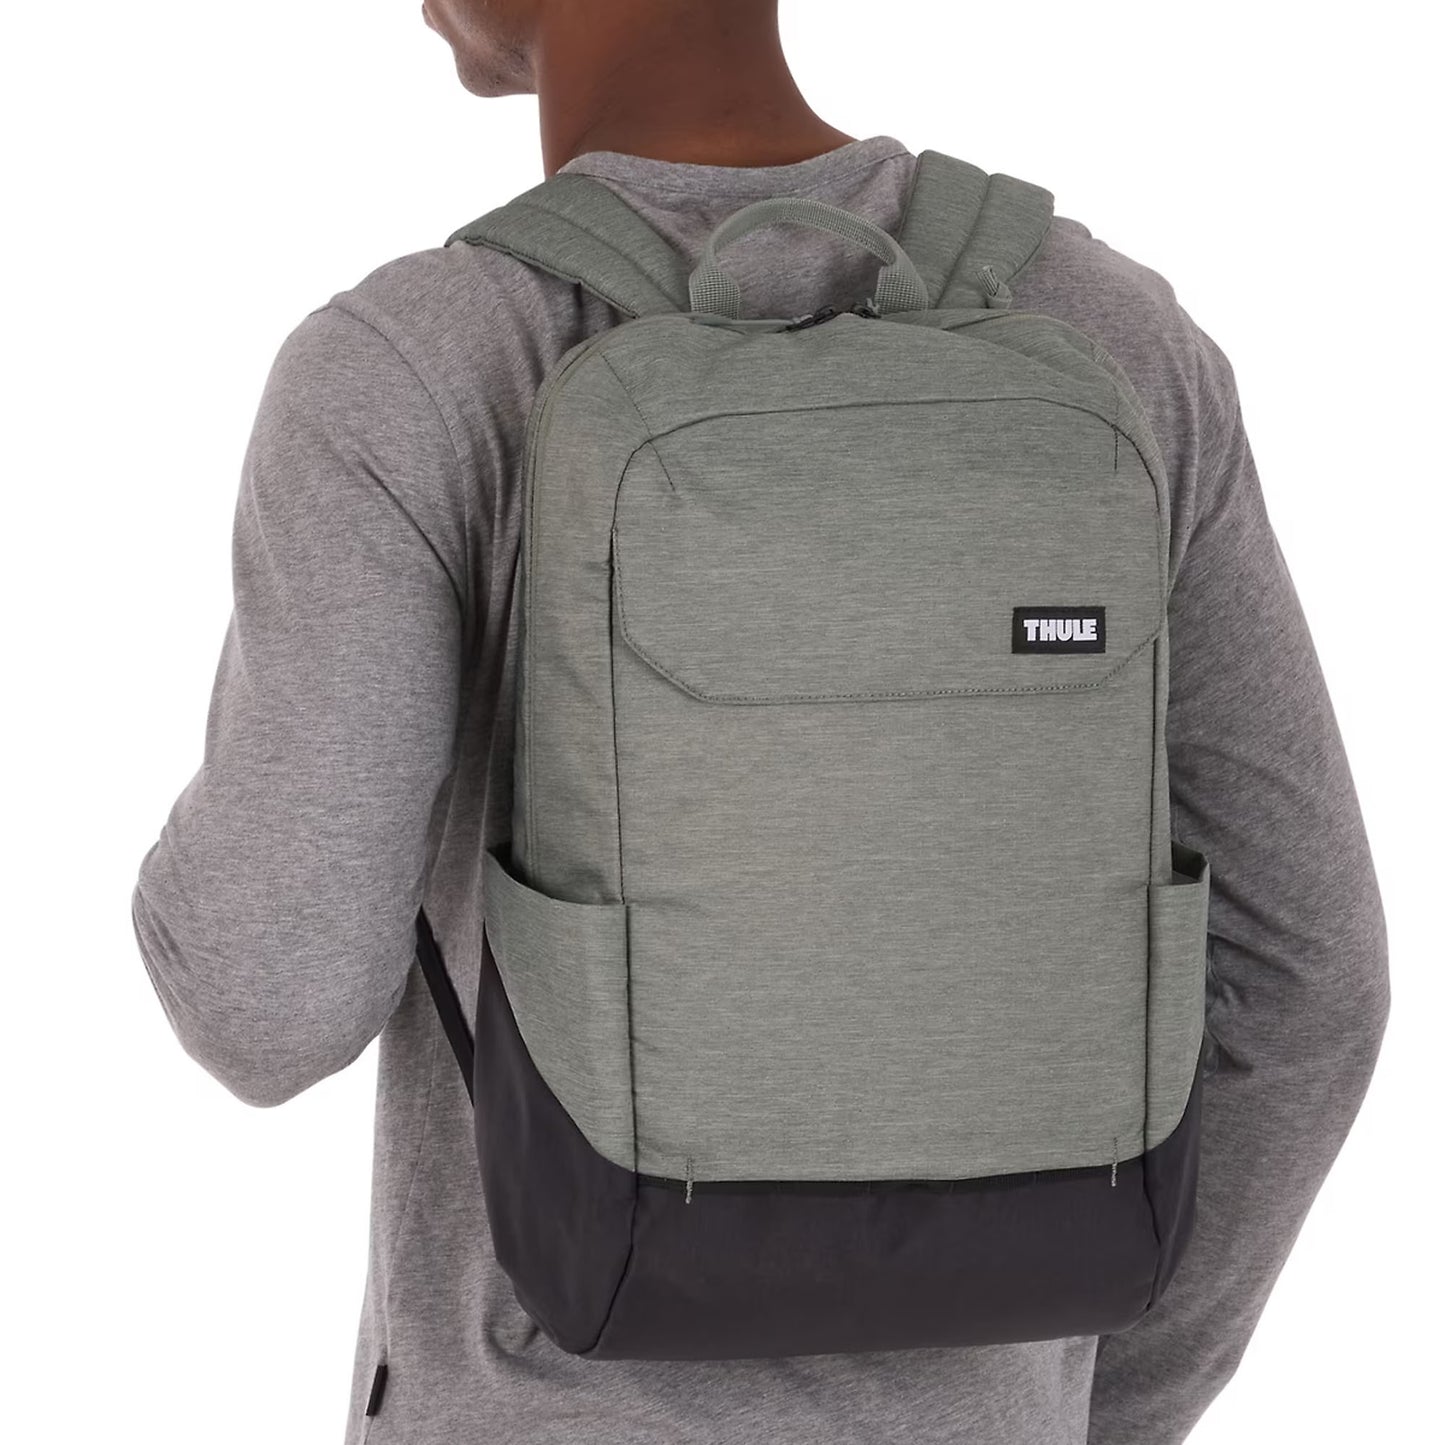 Thule Lithos Backpack 20L - Fit up to 15.6" Laptop or 16" MacBook - Agave Green-Black (Barcode: 0085854253383 )